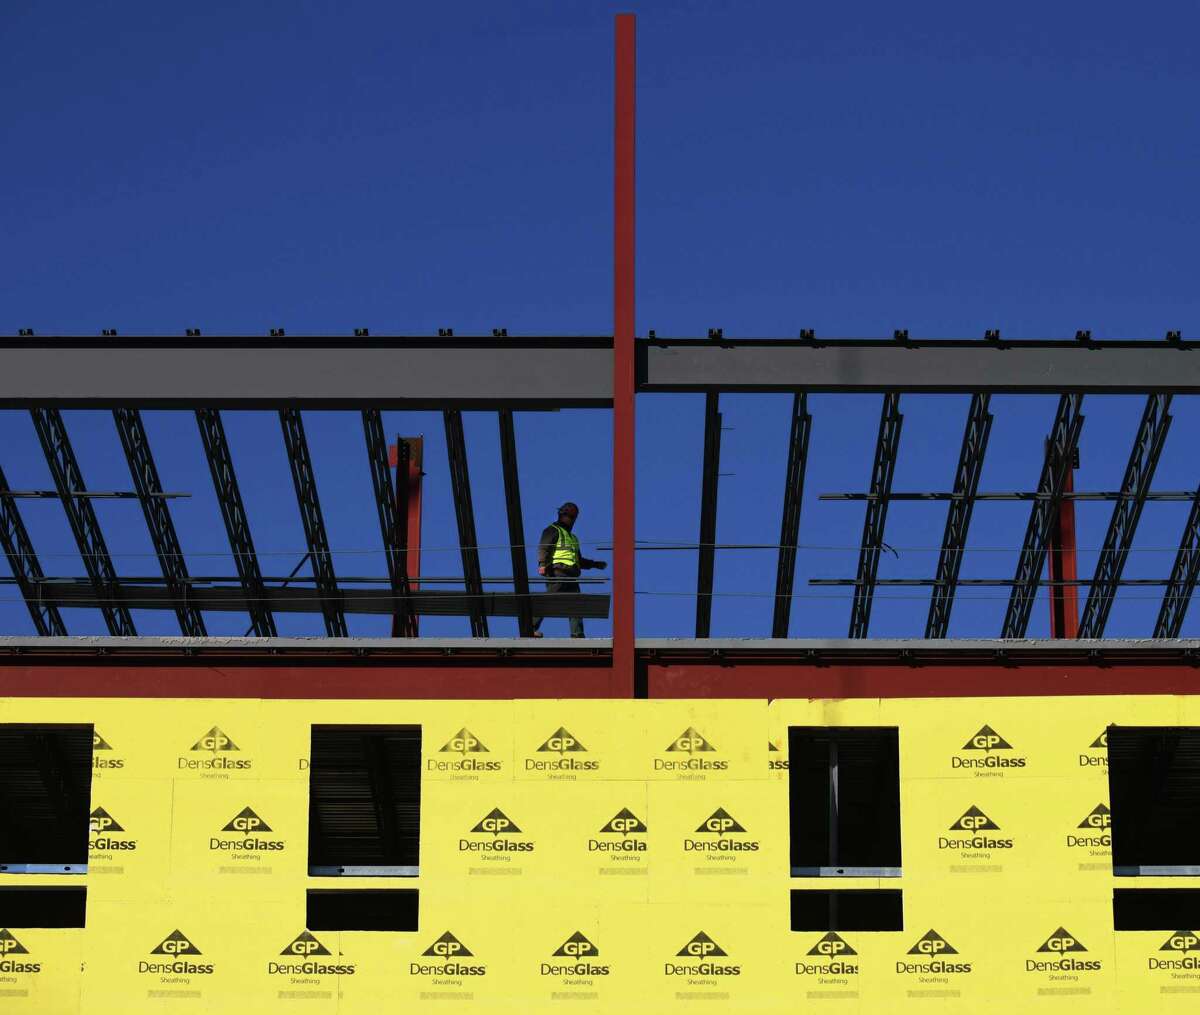 A crew continues construction on a new apartment building near St. Andrews Episcopal Church on Washington Boulevard in Stamford, Conn. Wednesday, Jan. 20, 2021.